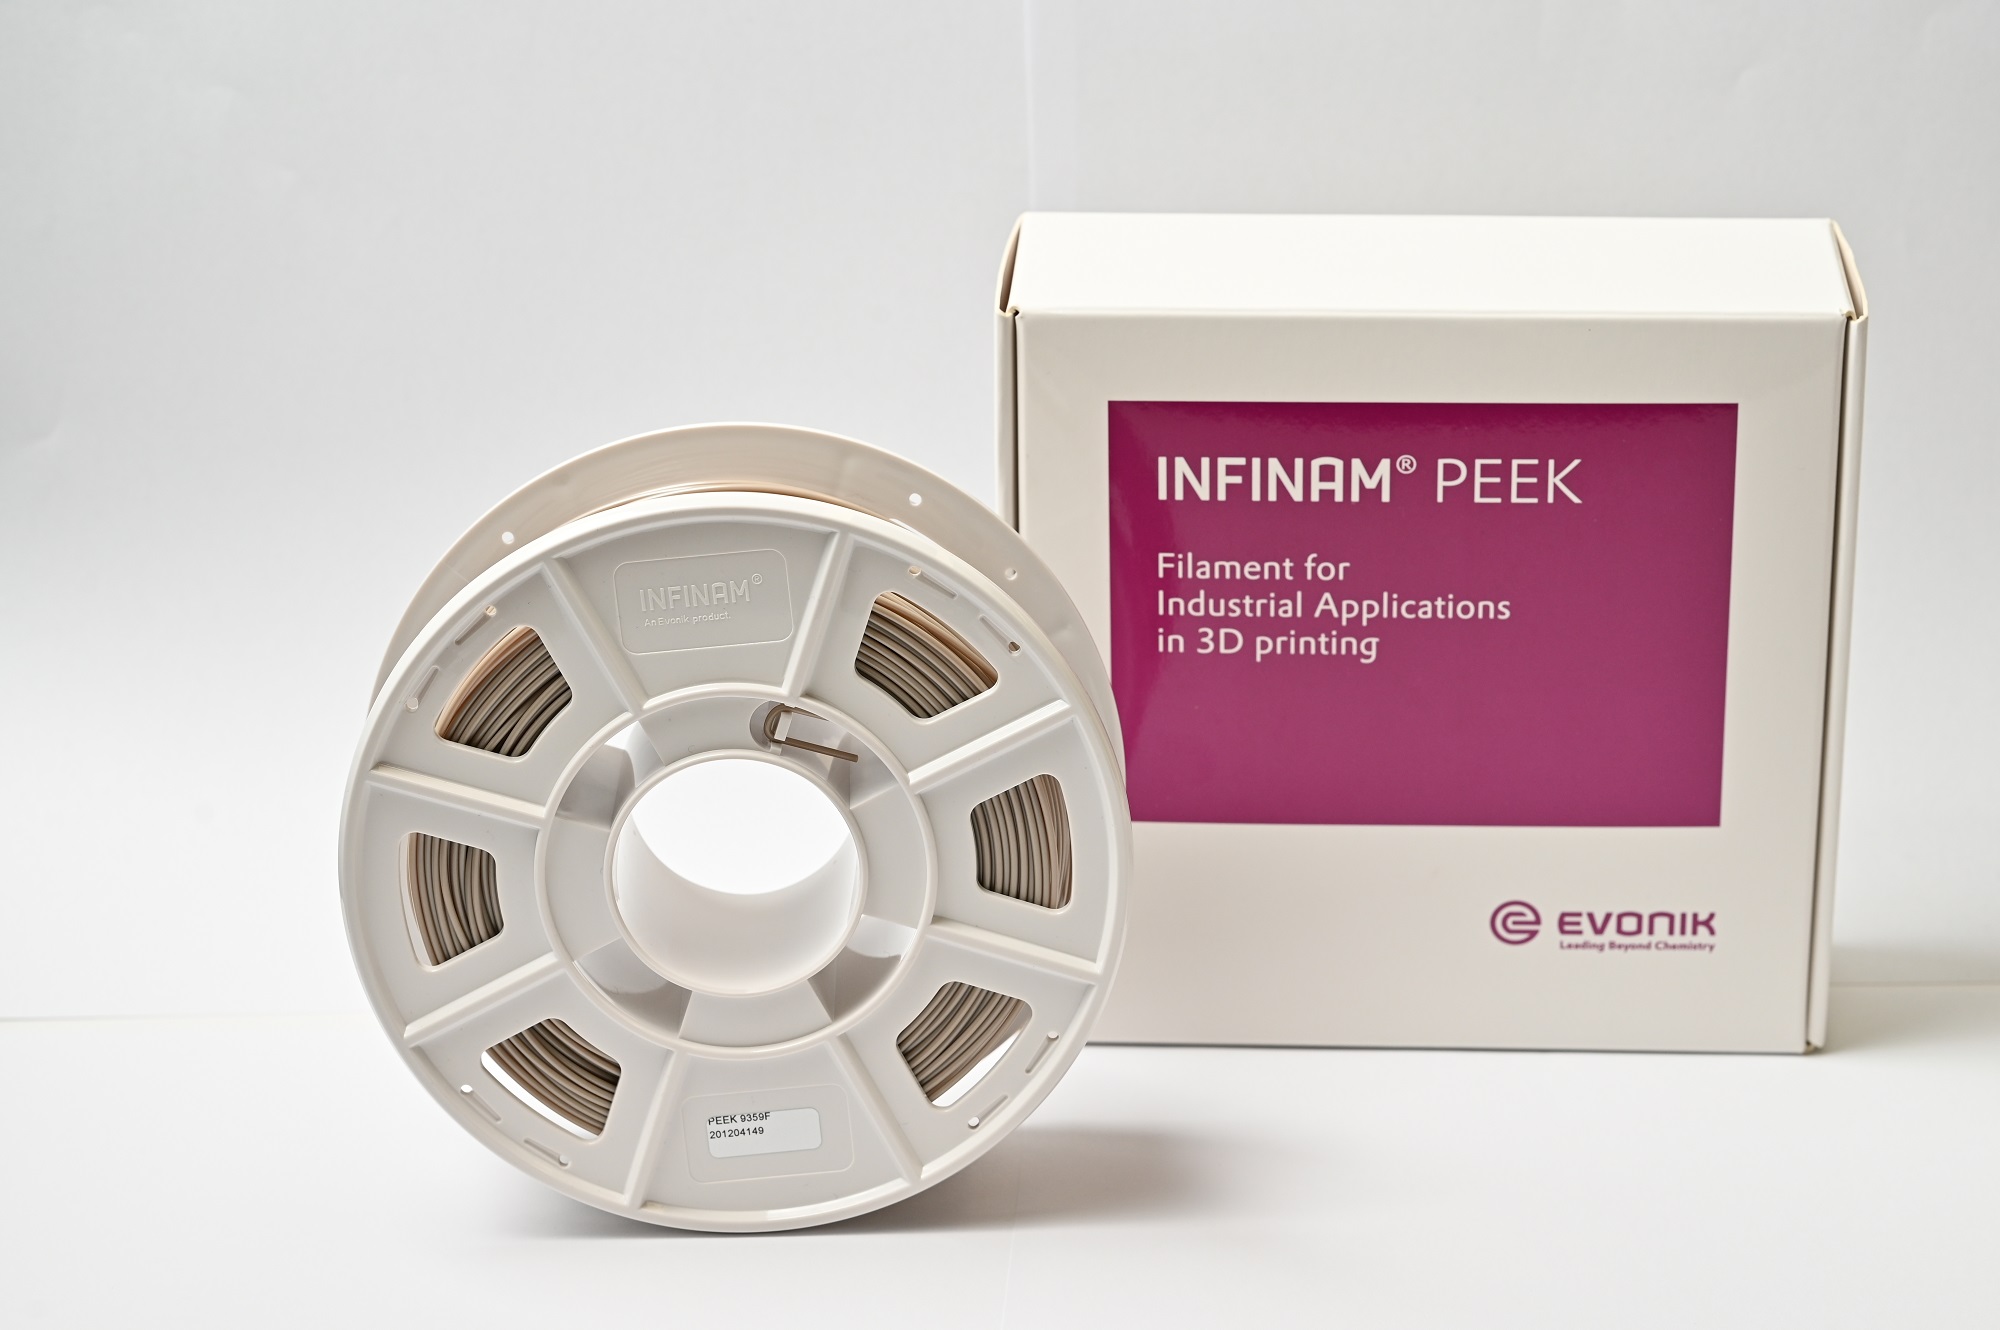 Compared to stainless steel, 3D parts made of INFINAM PEEK 9359 F are approximately 80% lighter and 30% tougher with high levels of fatigue resistance.